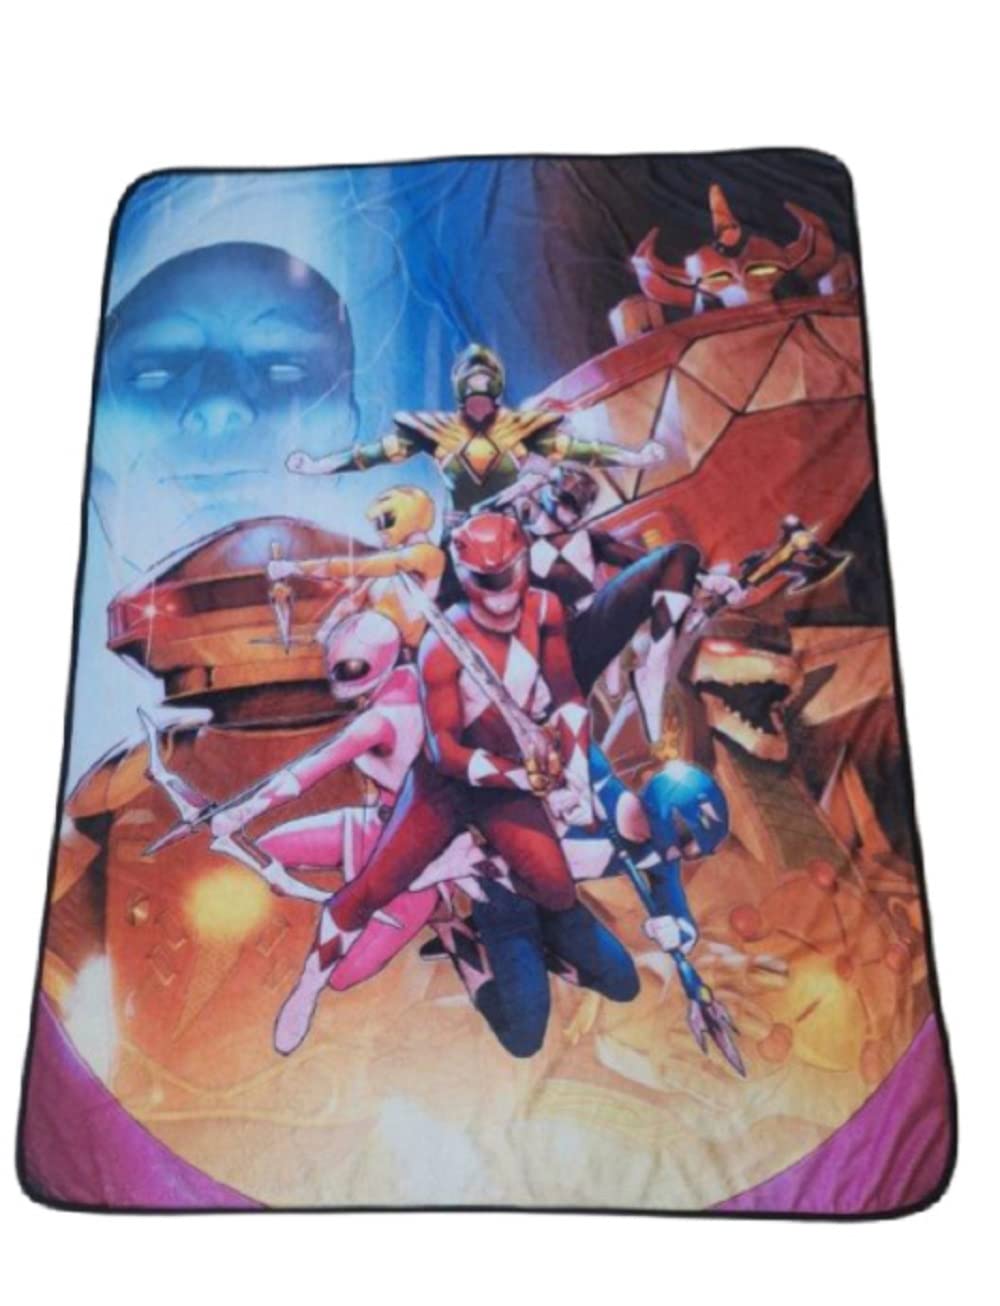 Power Rangers Fleece Softest Comfy Throw Blanket for Adults & Kids| Measures 60 x 45 Inches